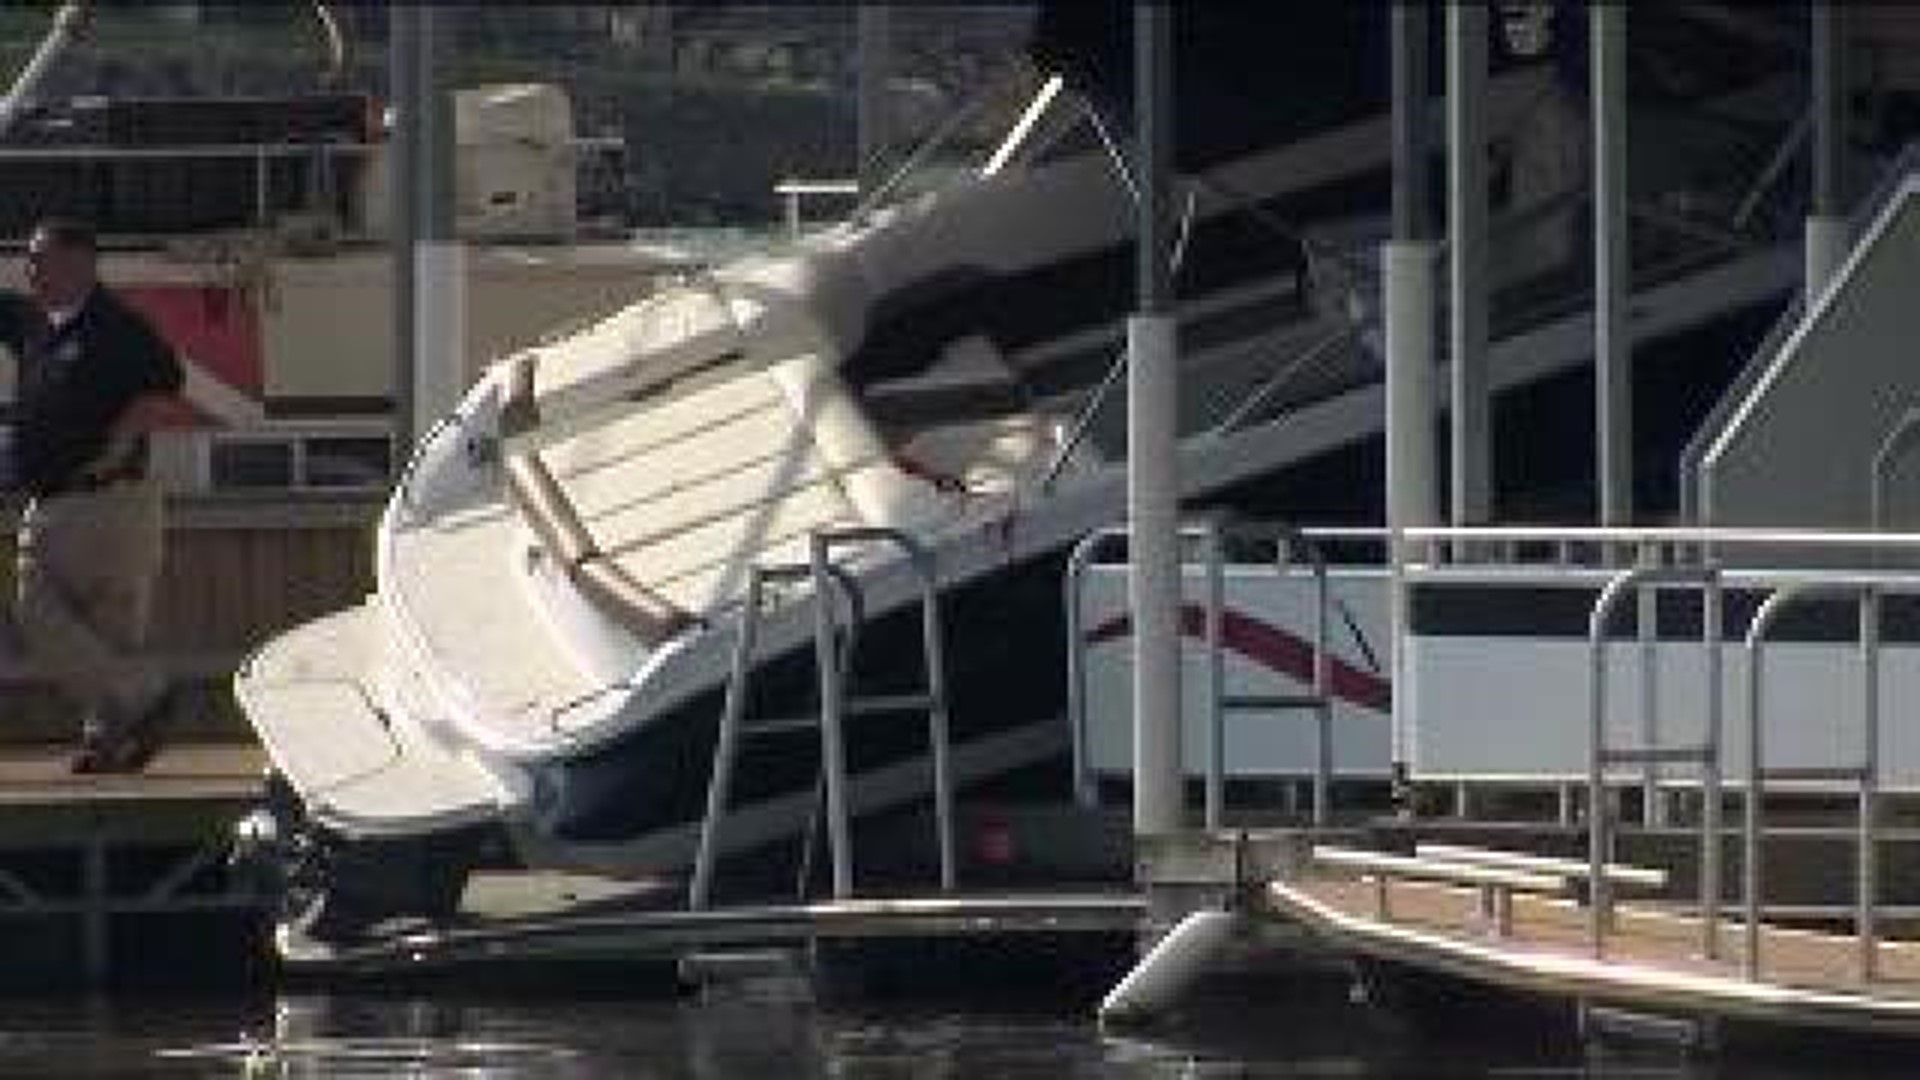 VIDEO: 911 Calls from Deadly Boating Accident Released